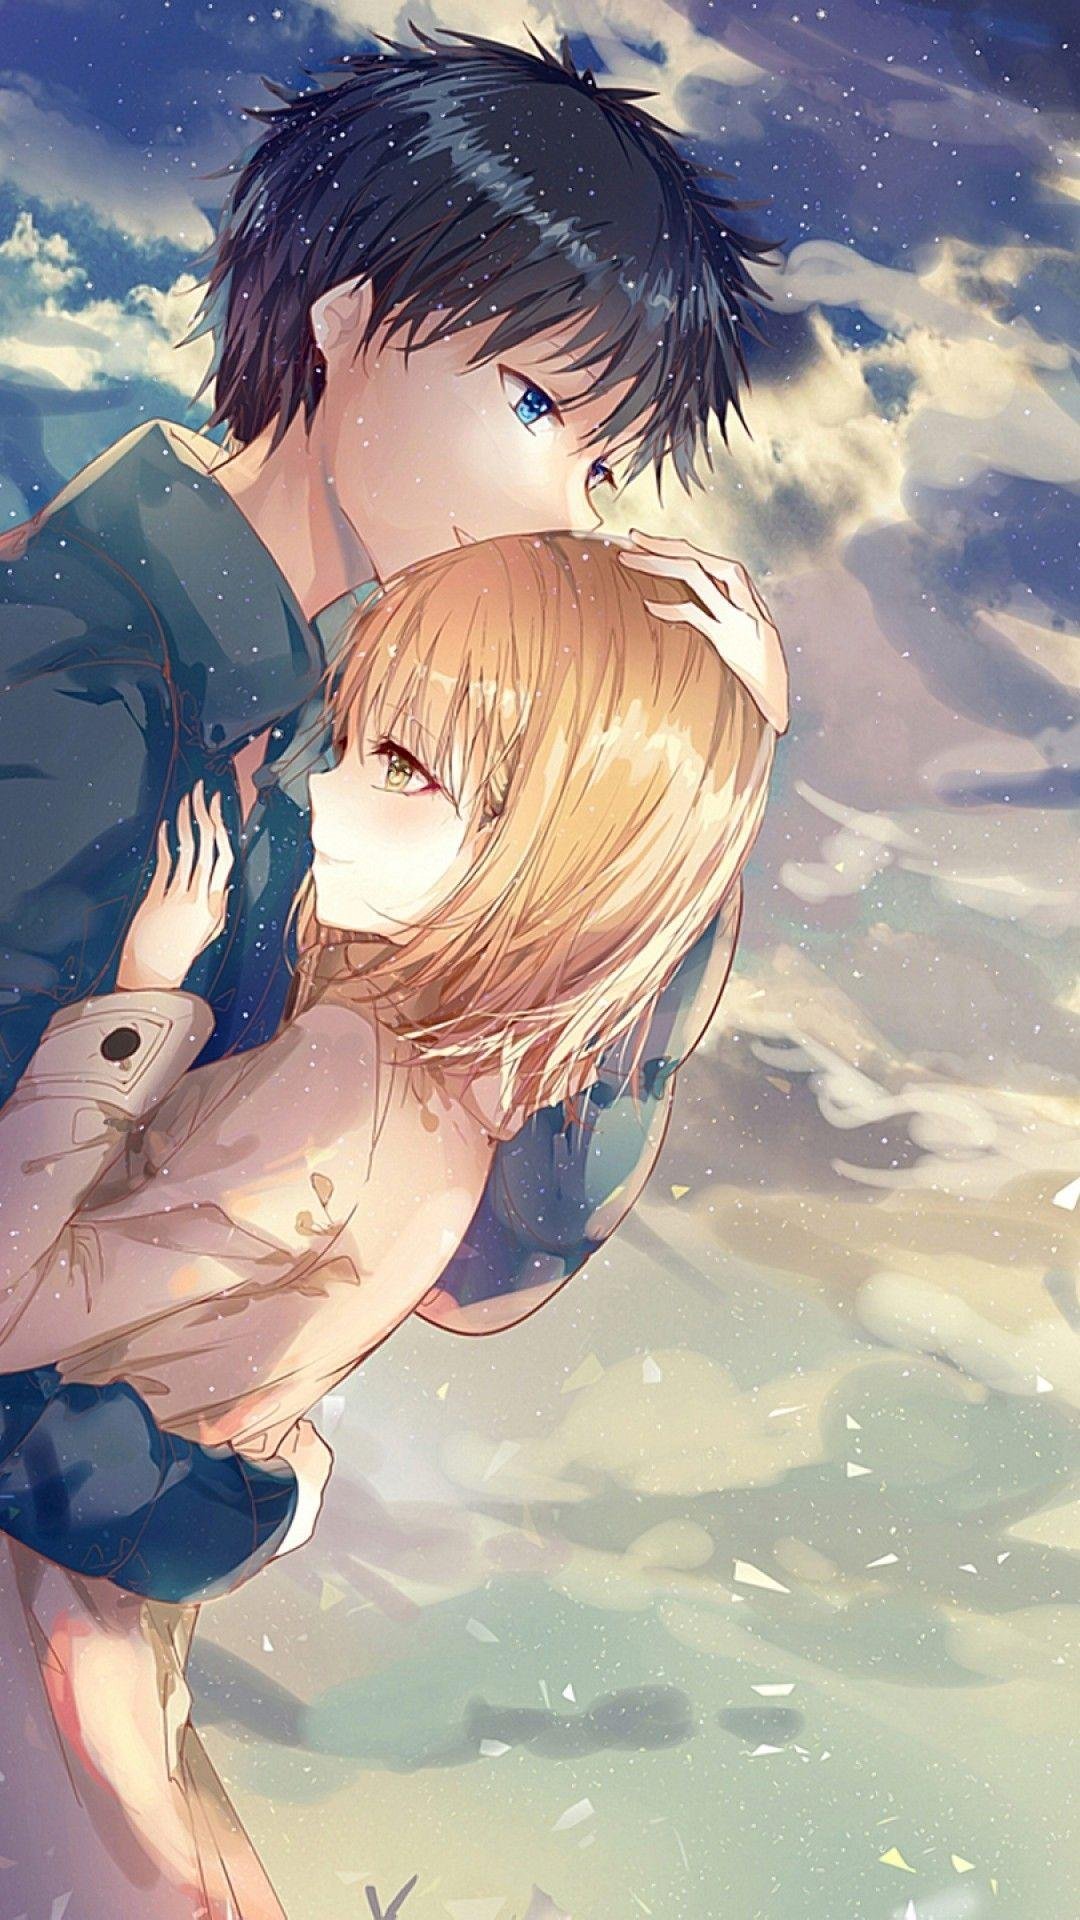 15 Romance Anime Recommendations Featuring Multiple Couples - Niadd